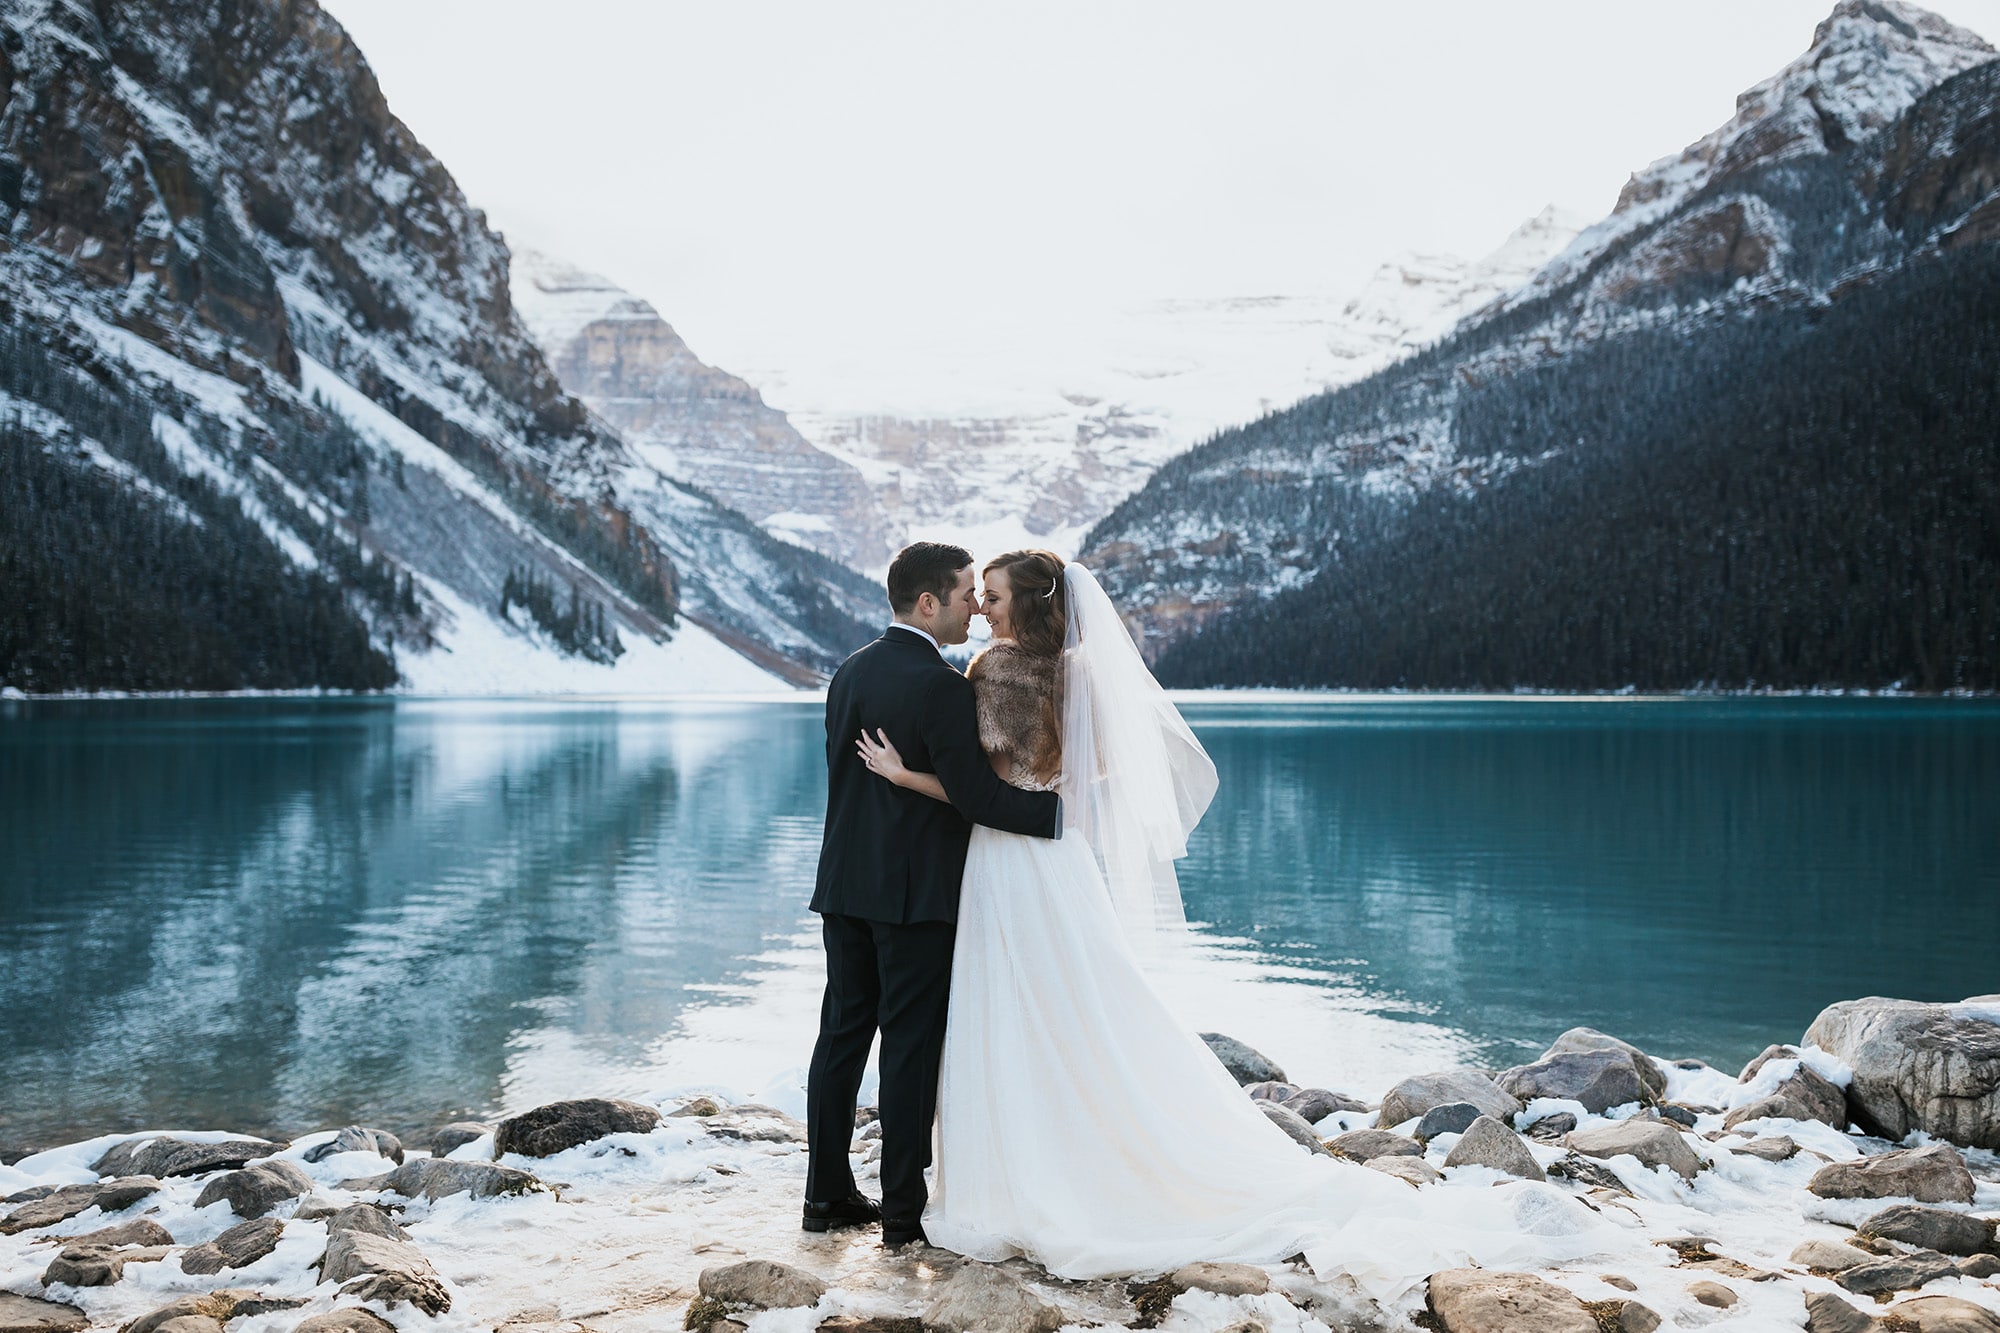 Late October wedding at Lake Louise with snow on the ground & blue water